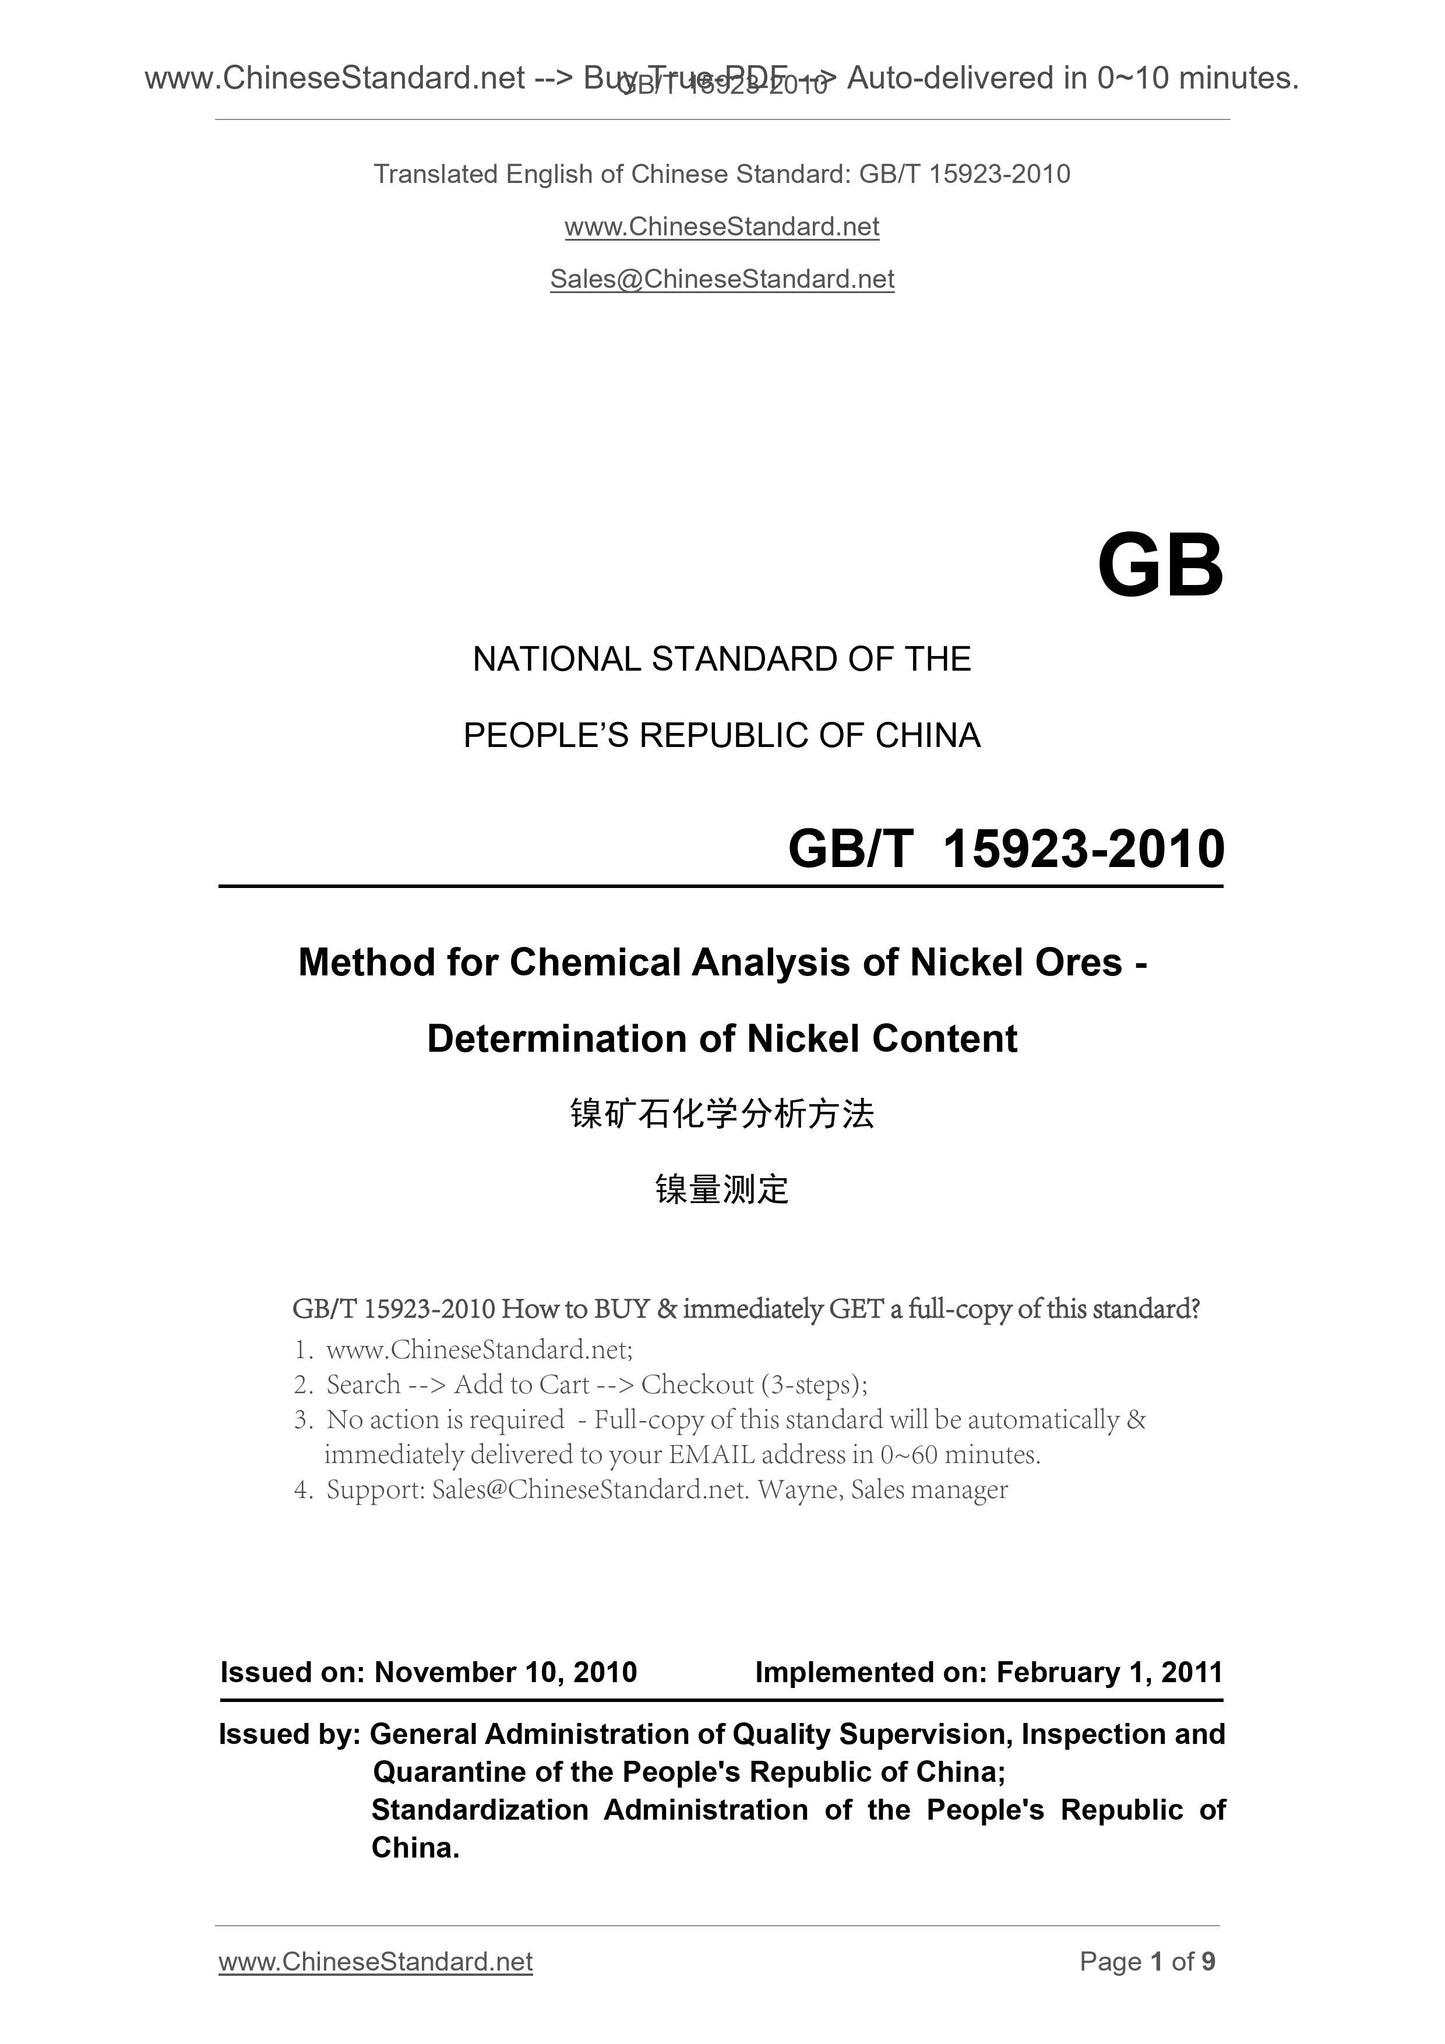 GB/T 15923-2010 Page 1